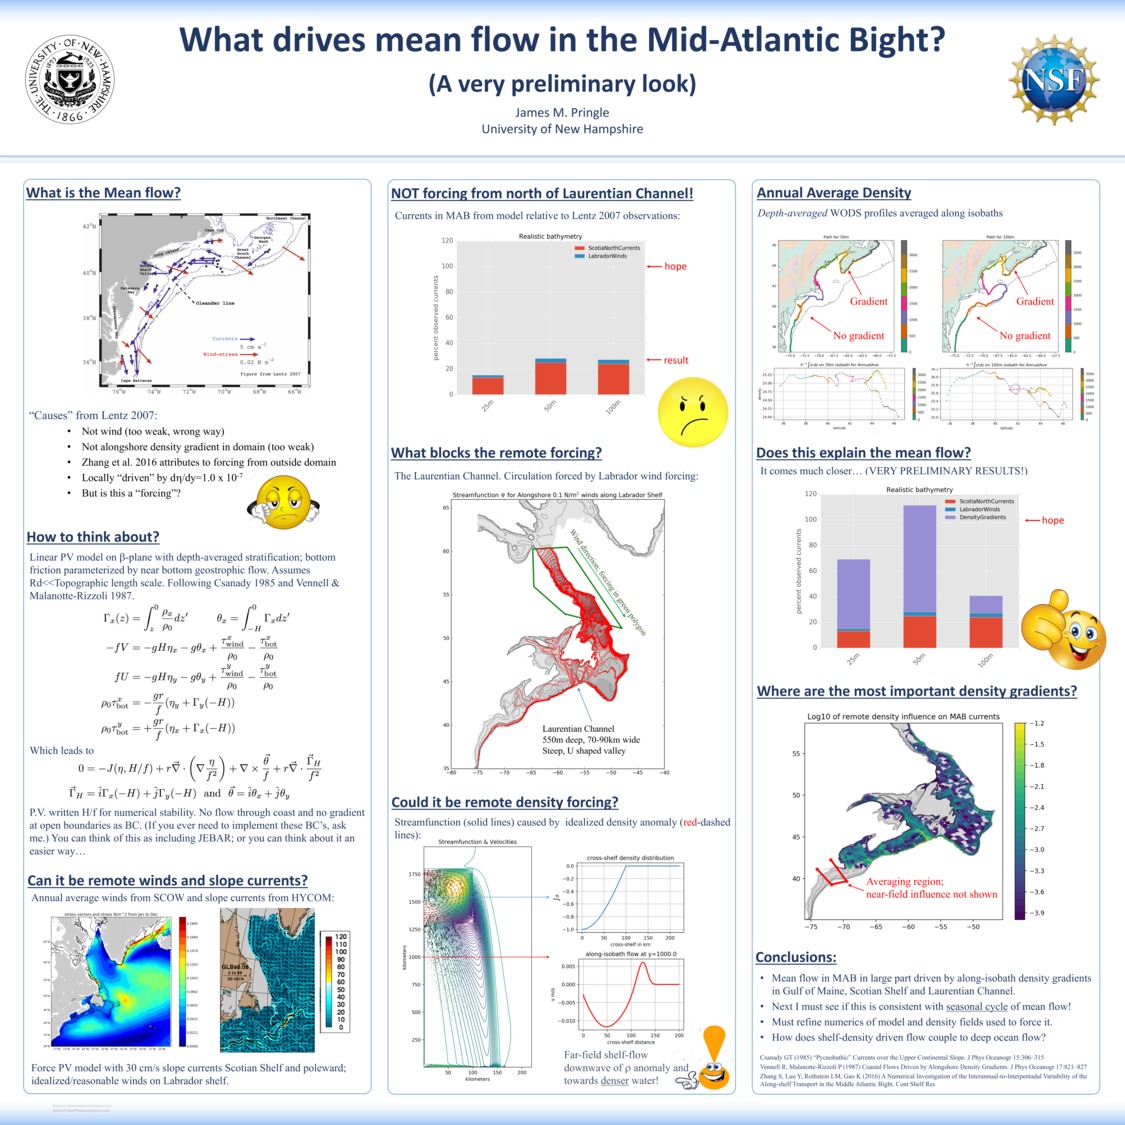 What Drives Mean Flow In The Mid-Atlantic Bight? by jpringle